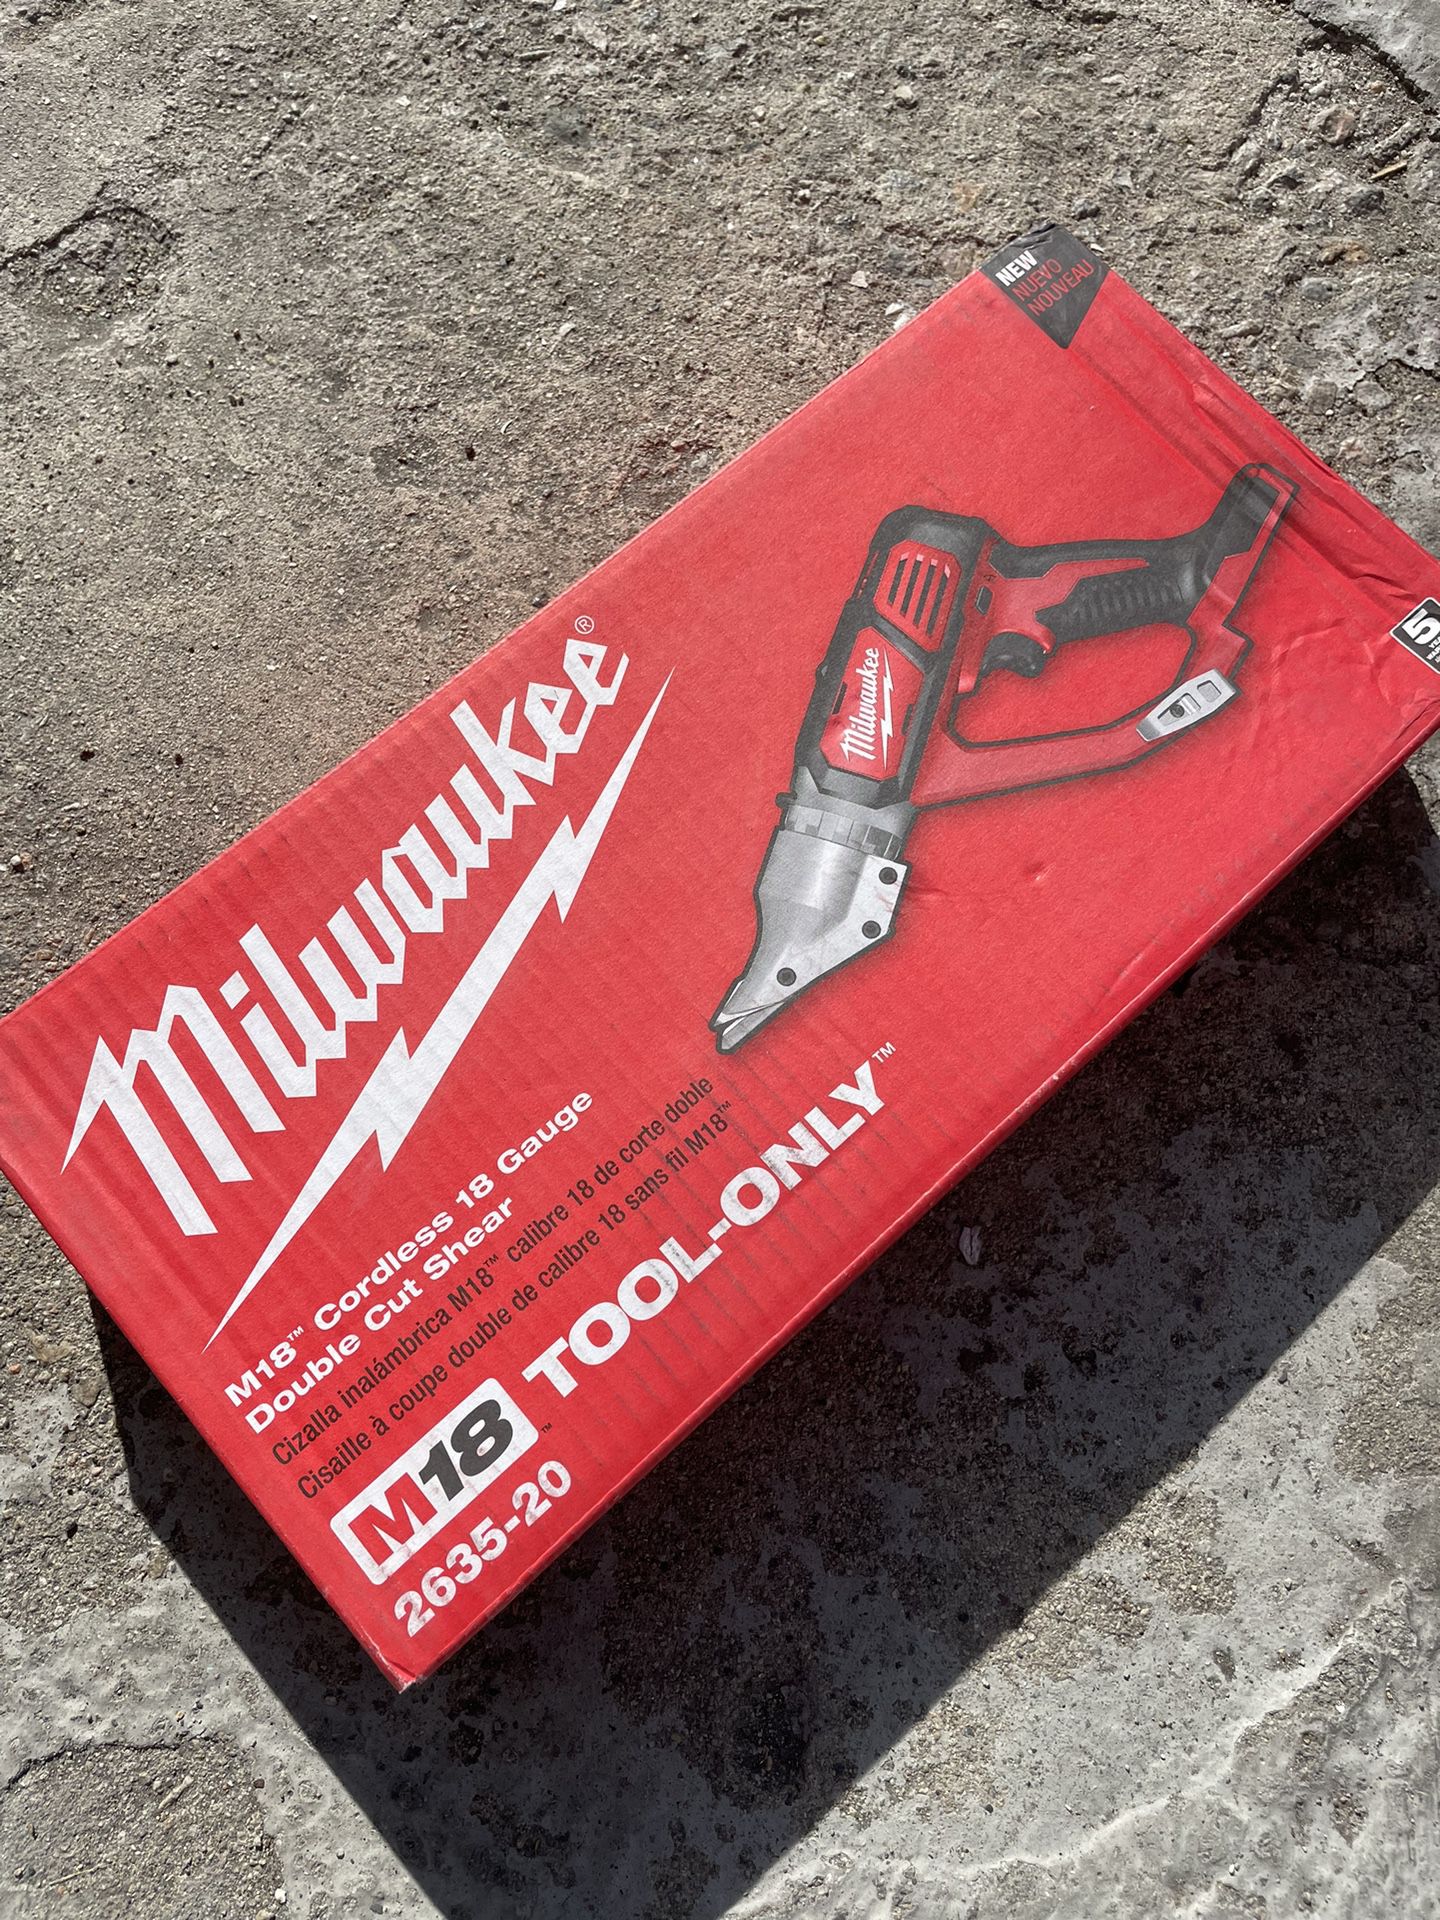 Milwaukee M18 18-Volt Lithium-Ion Cordless 18-Gauge Double Cut Metal Shear (Tool-Only) $159